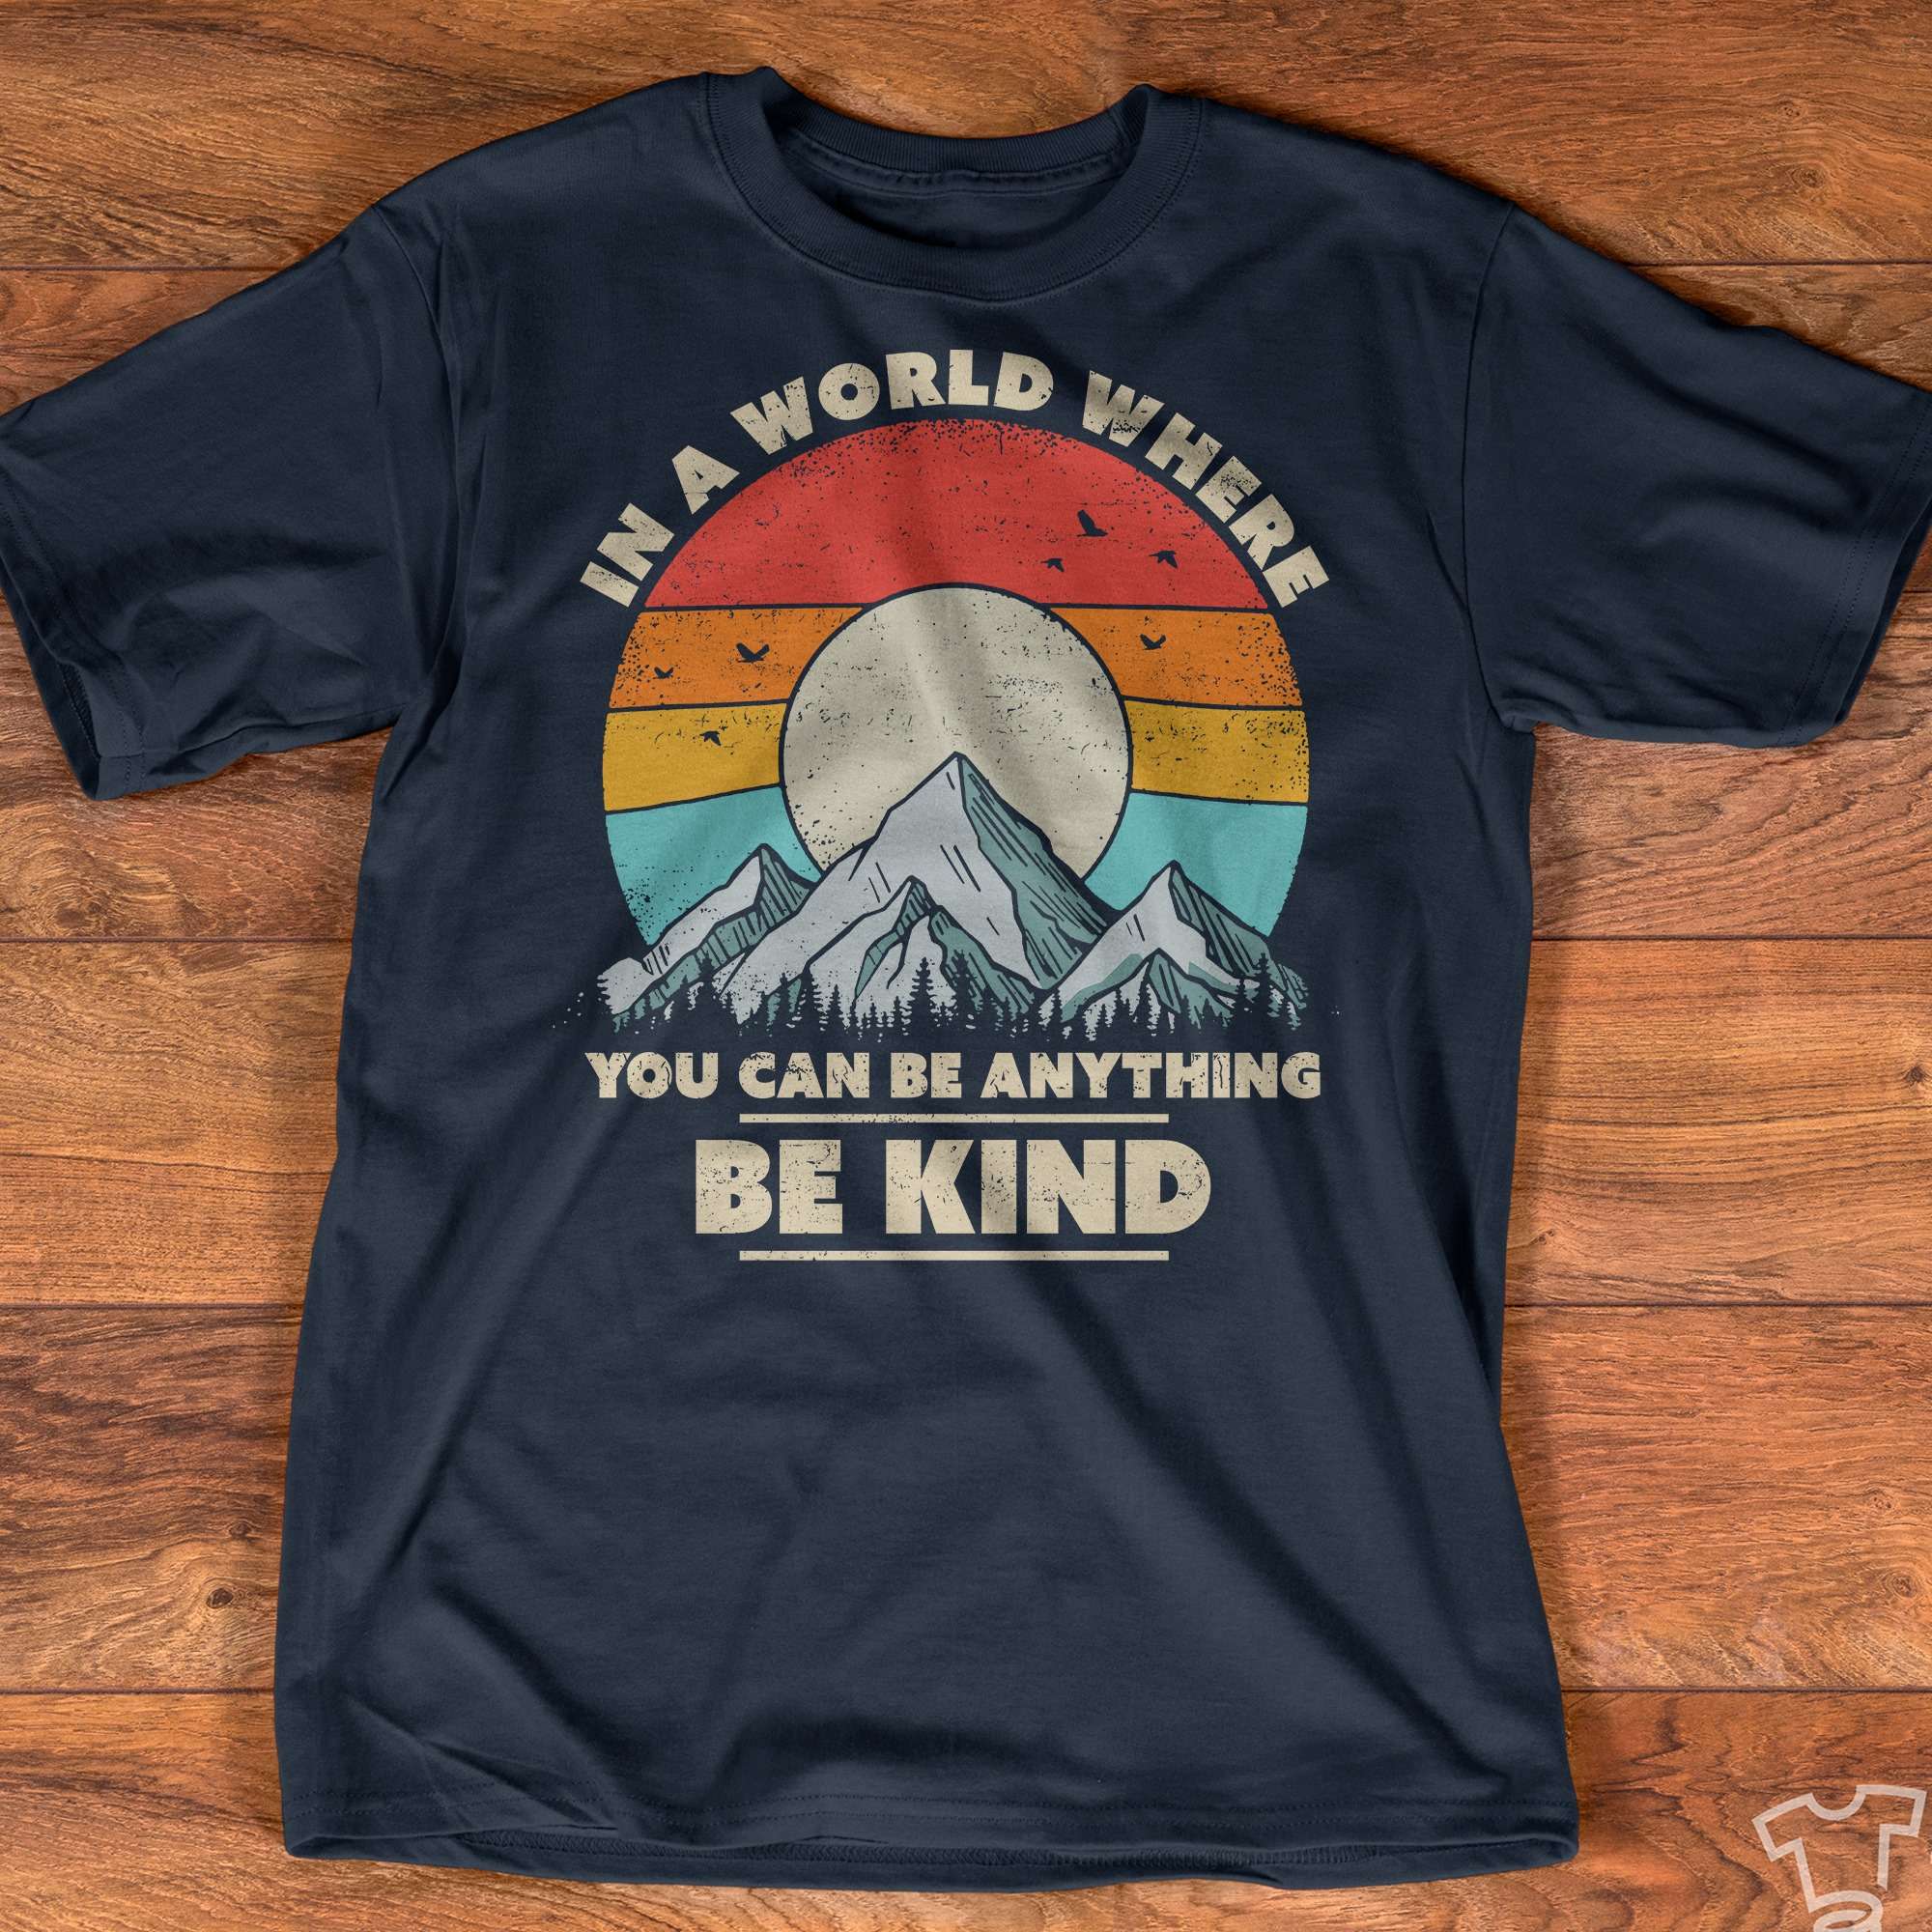 In a world where you can be anything, be kind - Moutain scenic spots, be kind in life